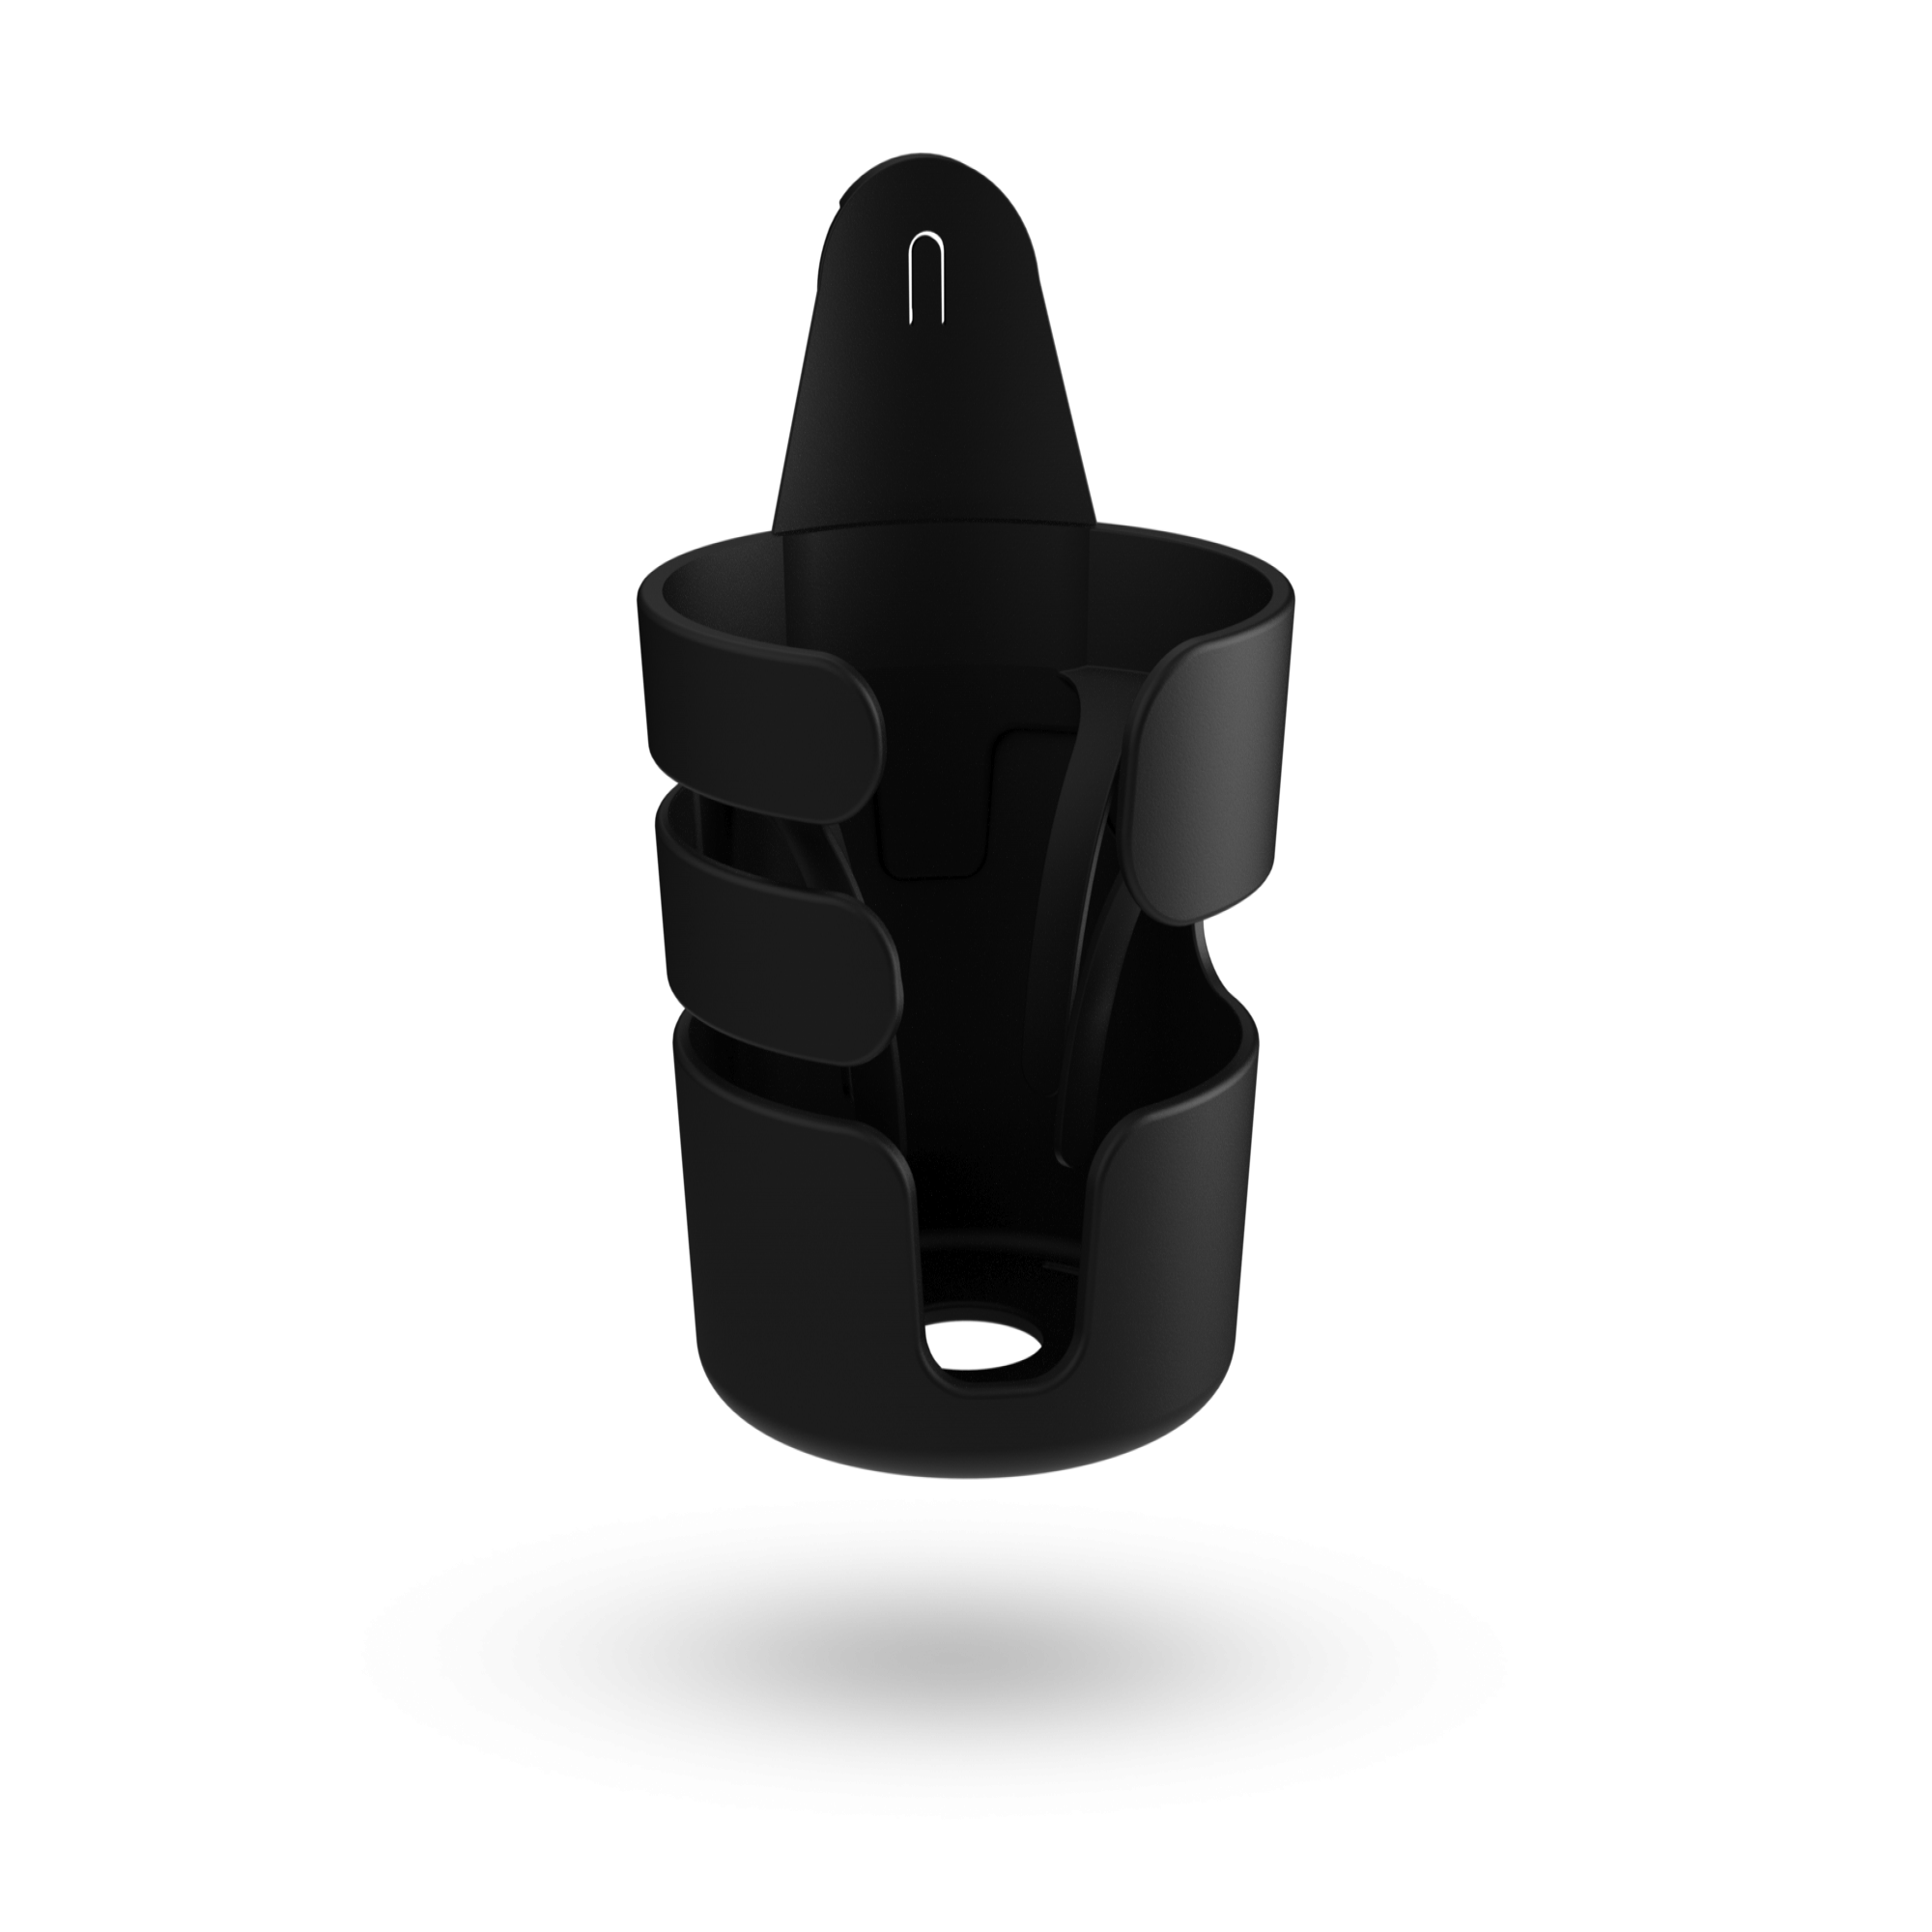 CH-1 Cup Holder Black